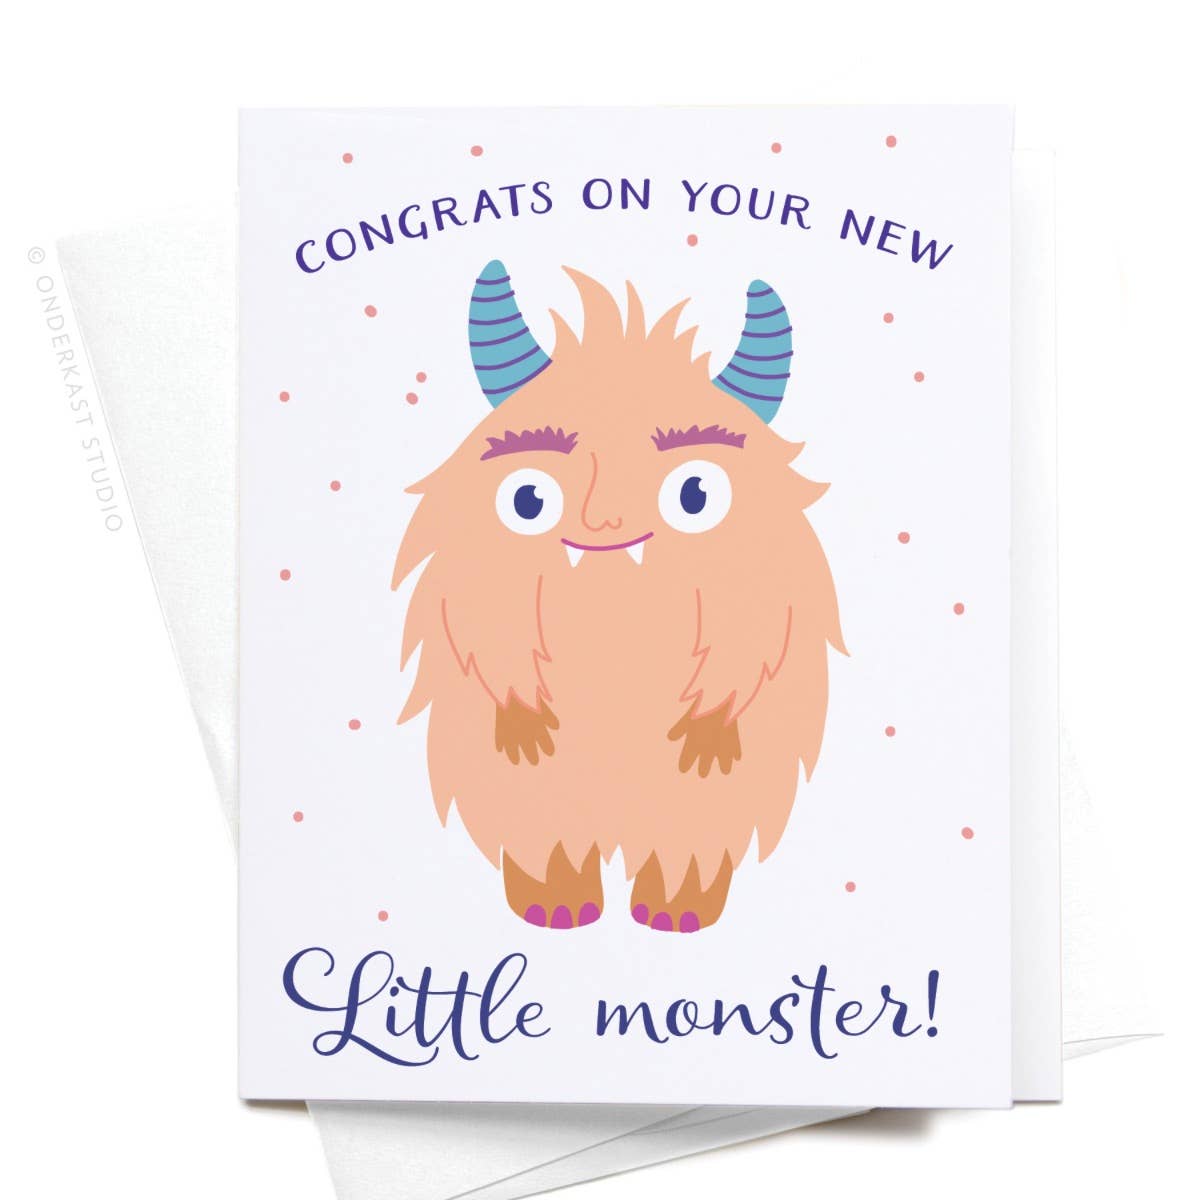 Congrats On Your New Little Monster! Greeting Card